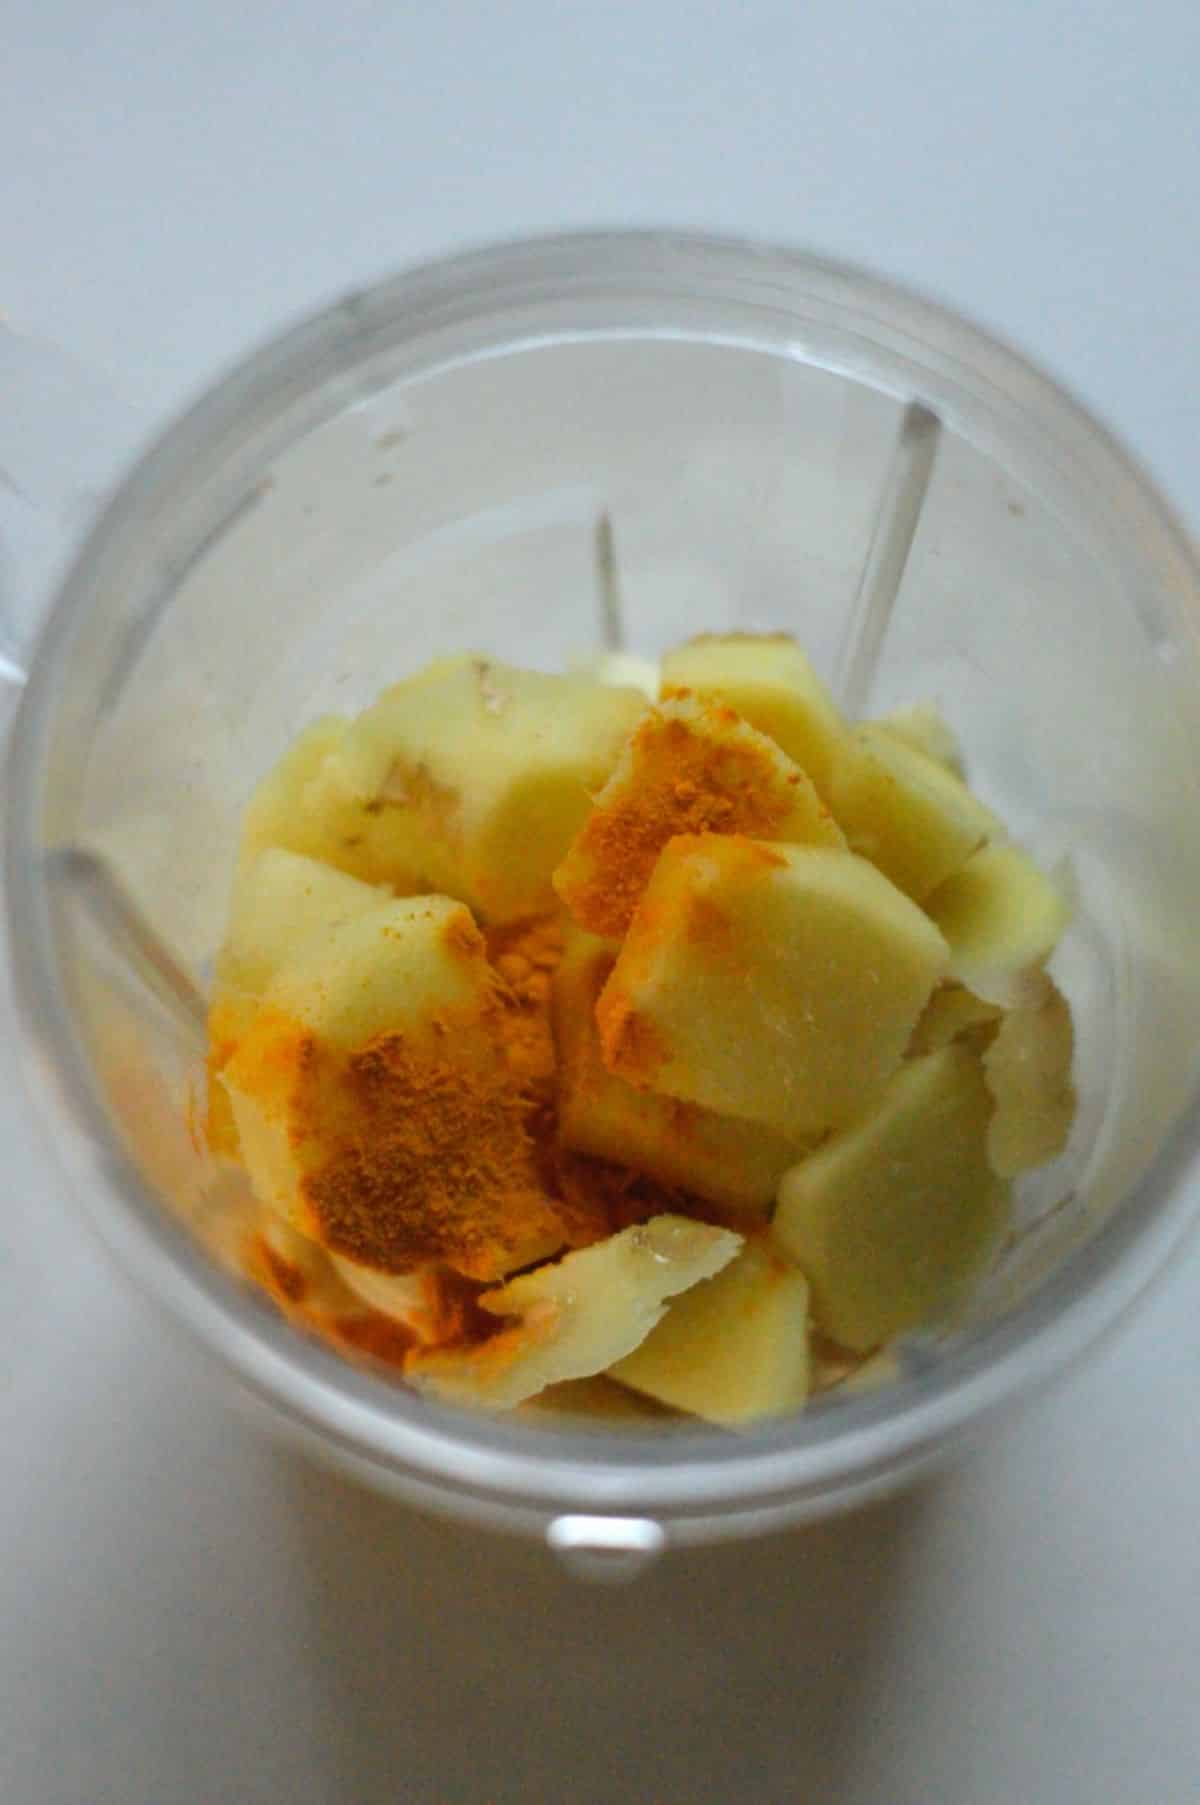 Sliced ginger root and peeled garlic cloved spinkled with turmeric powder in a blender.